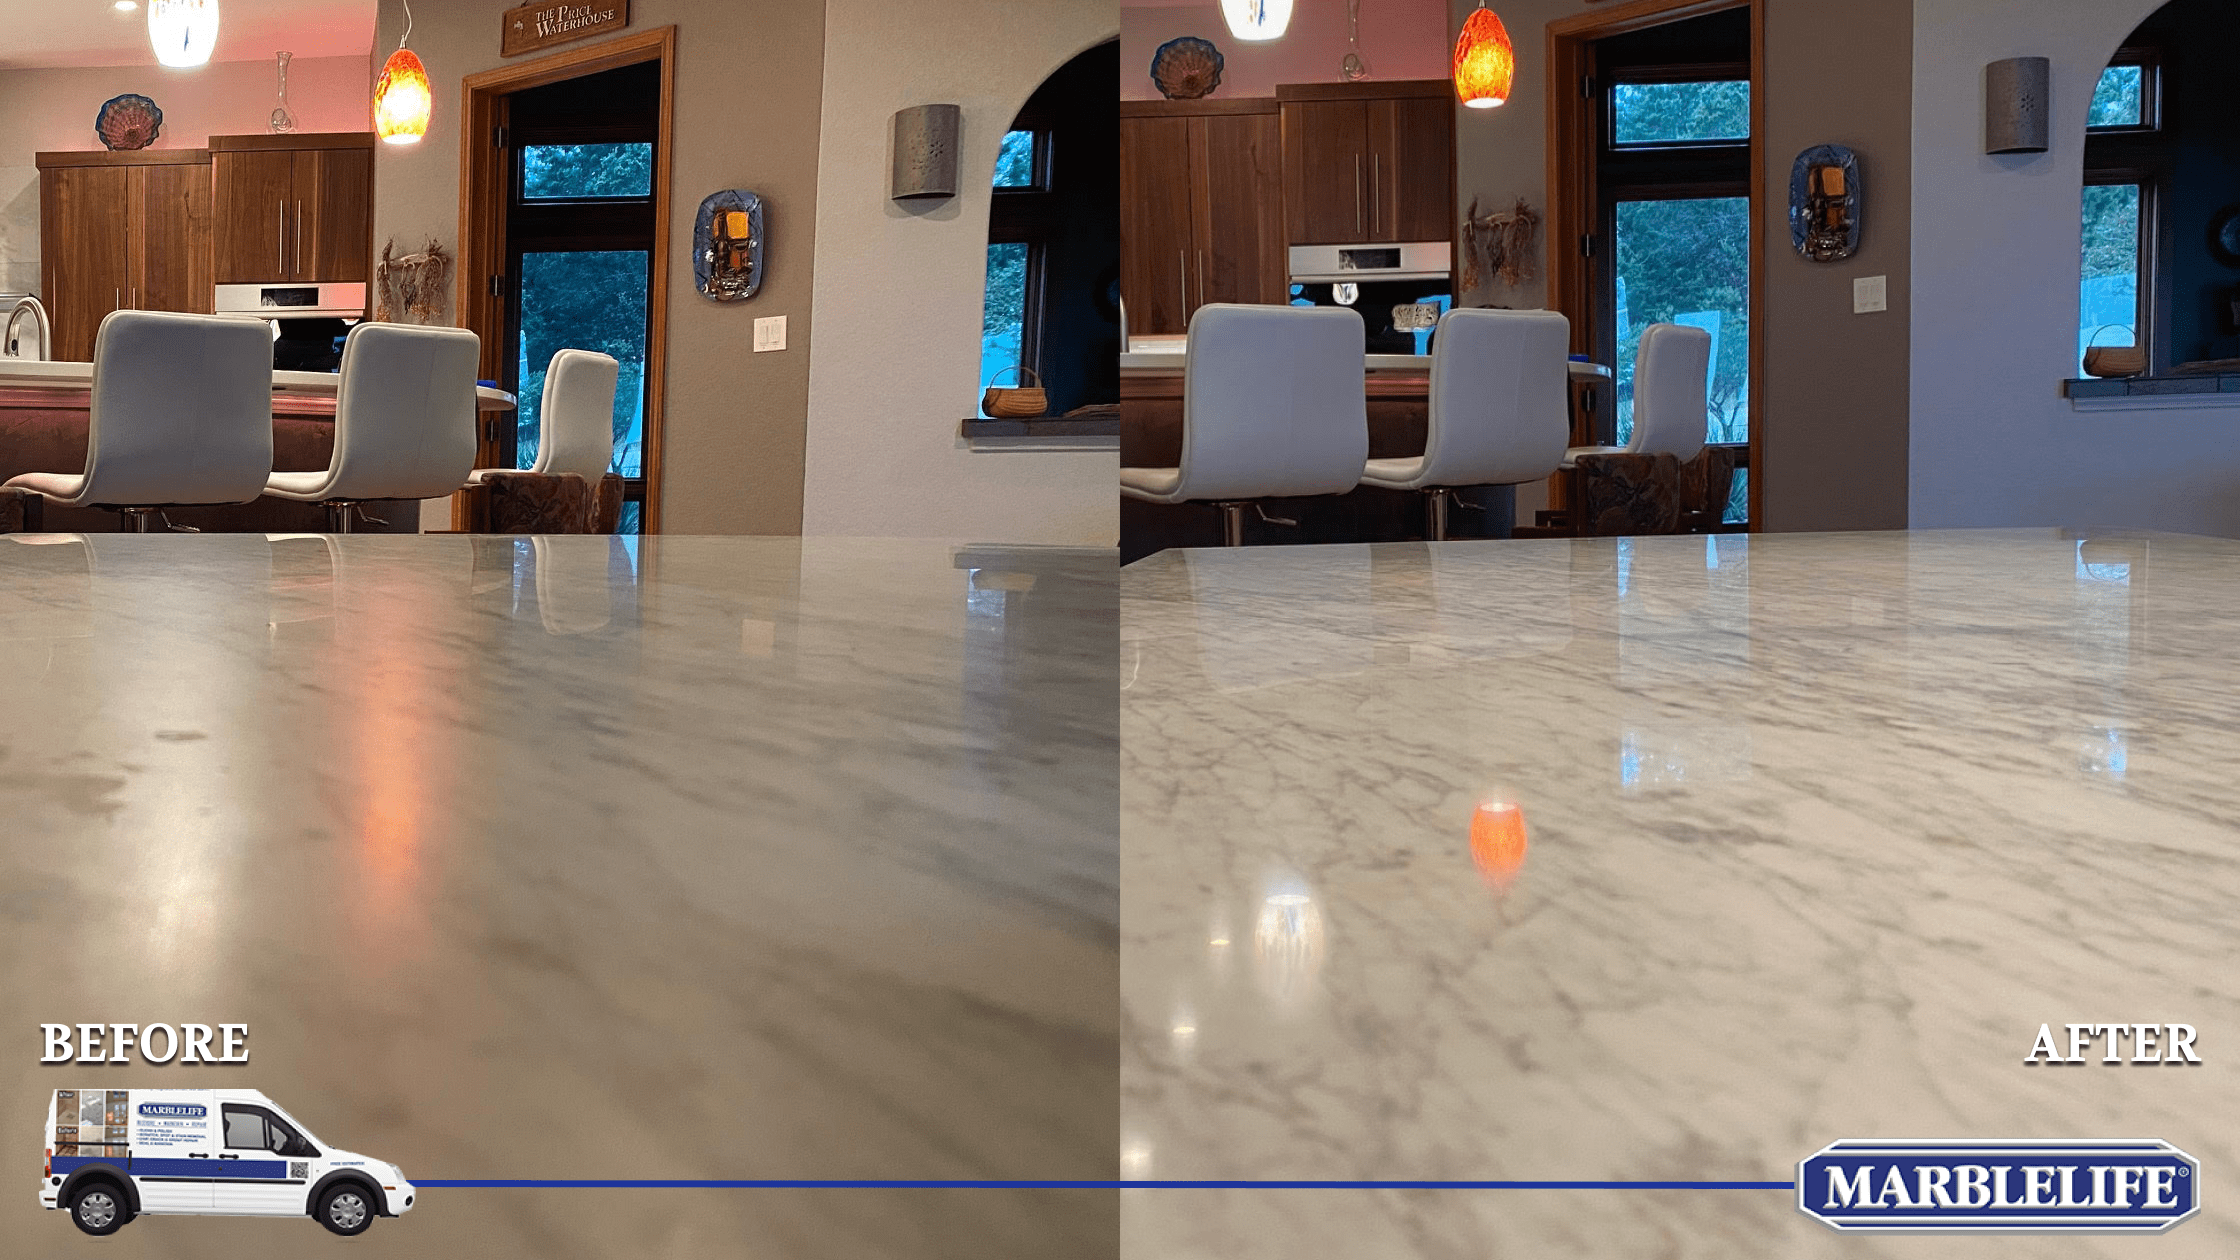 Why Should You Think Twice Before DIY Cleaning Marble & Granite? - Post